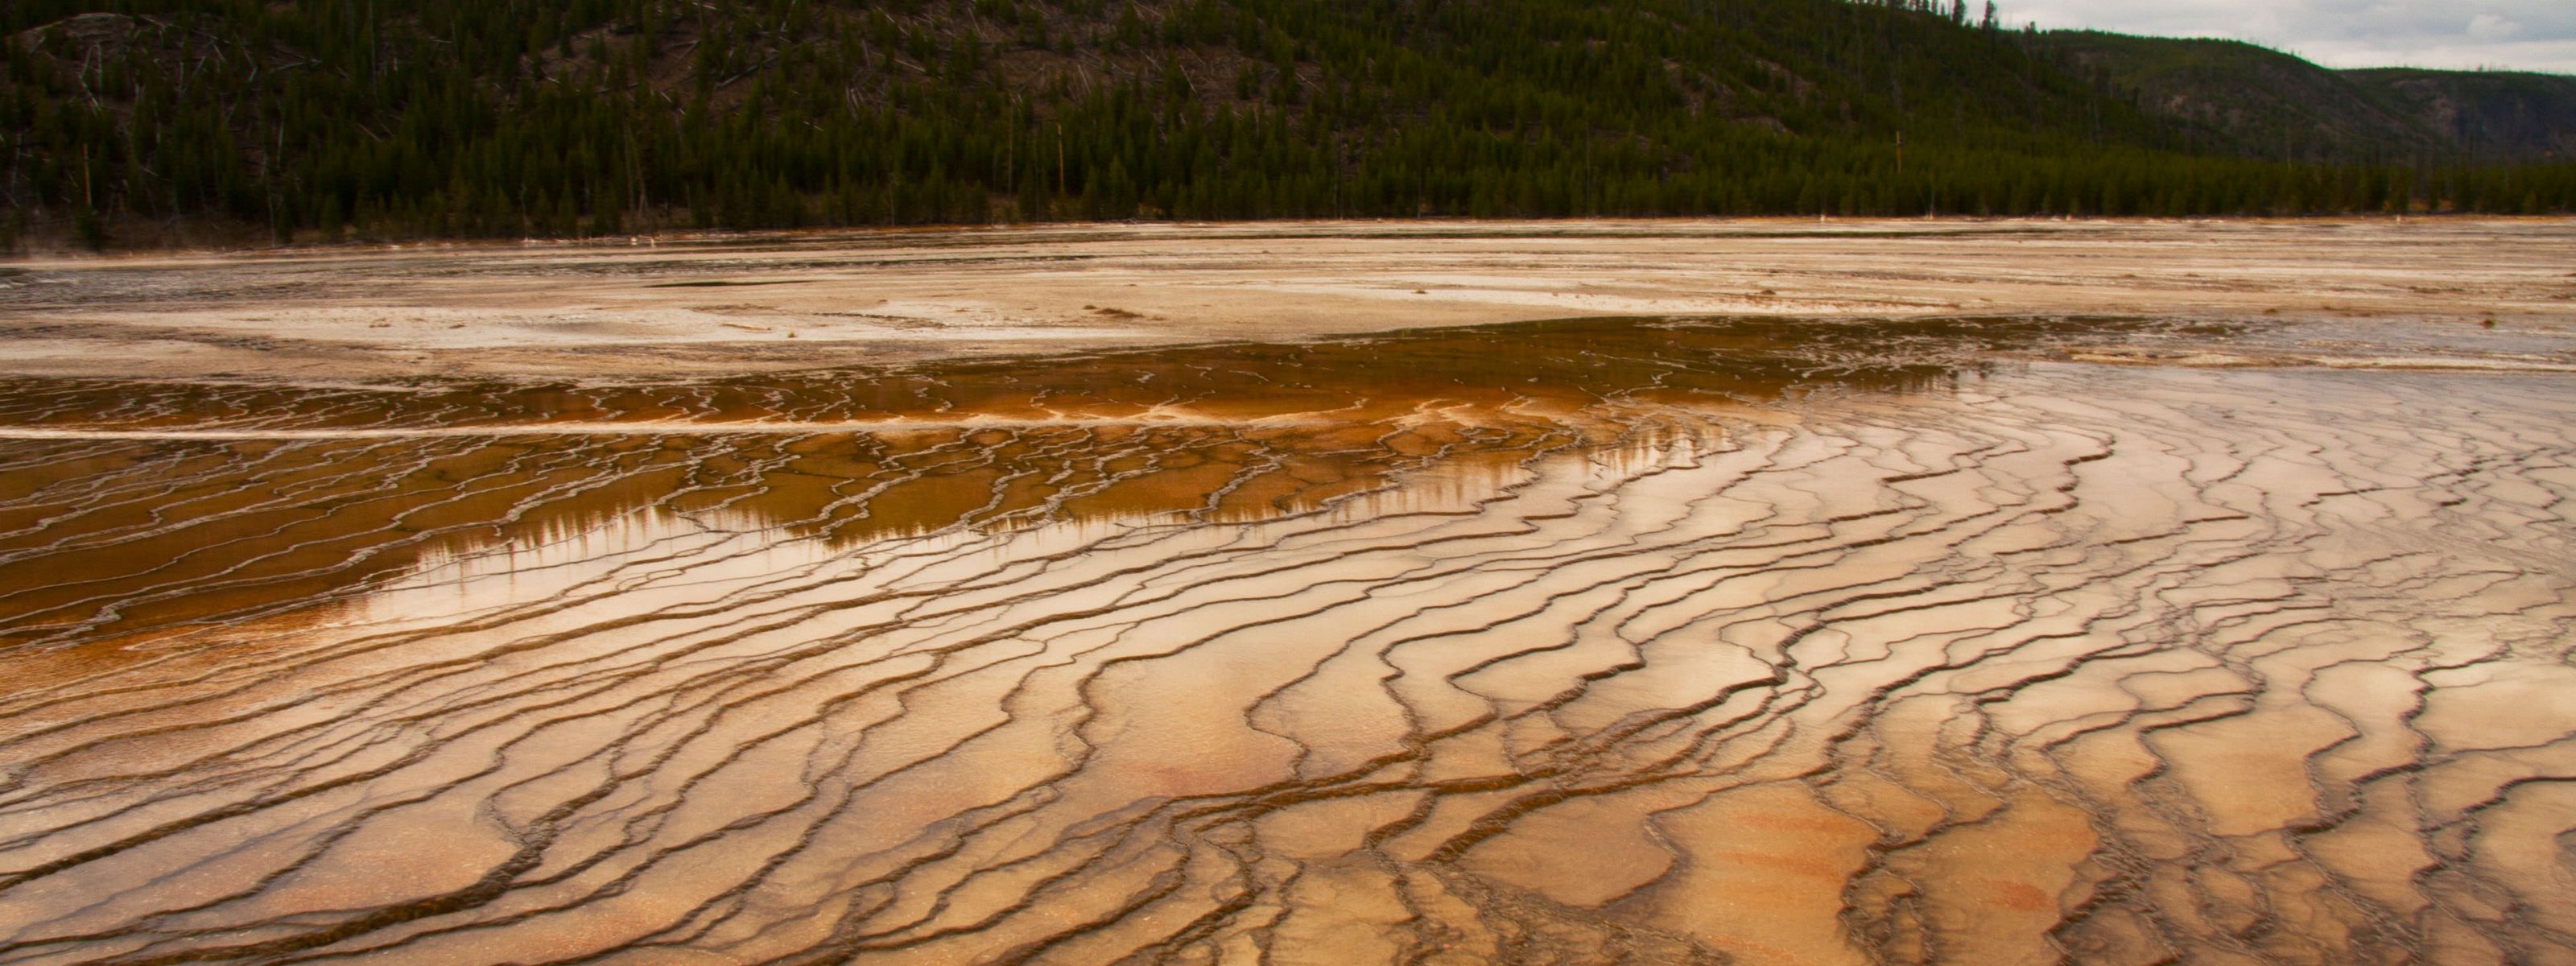 A mineral pool reflects the landscape at Yellowstone National Park.